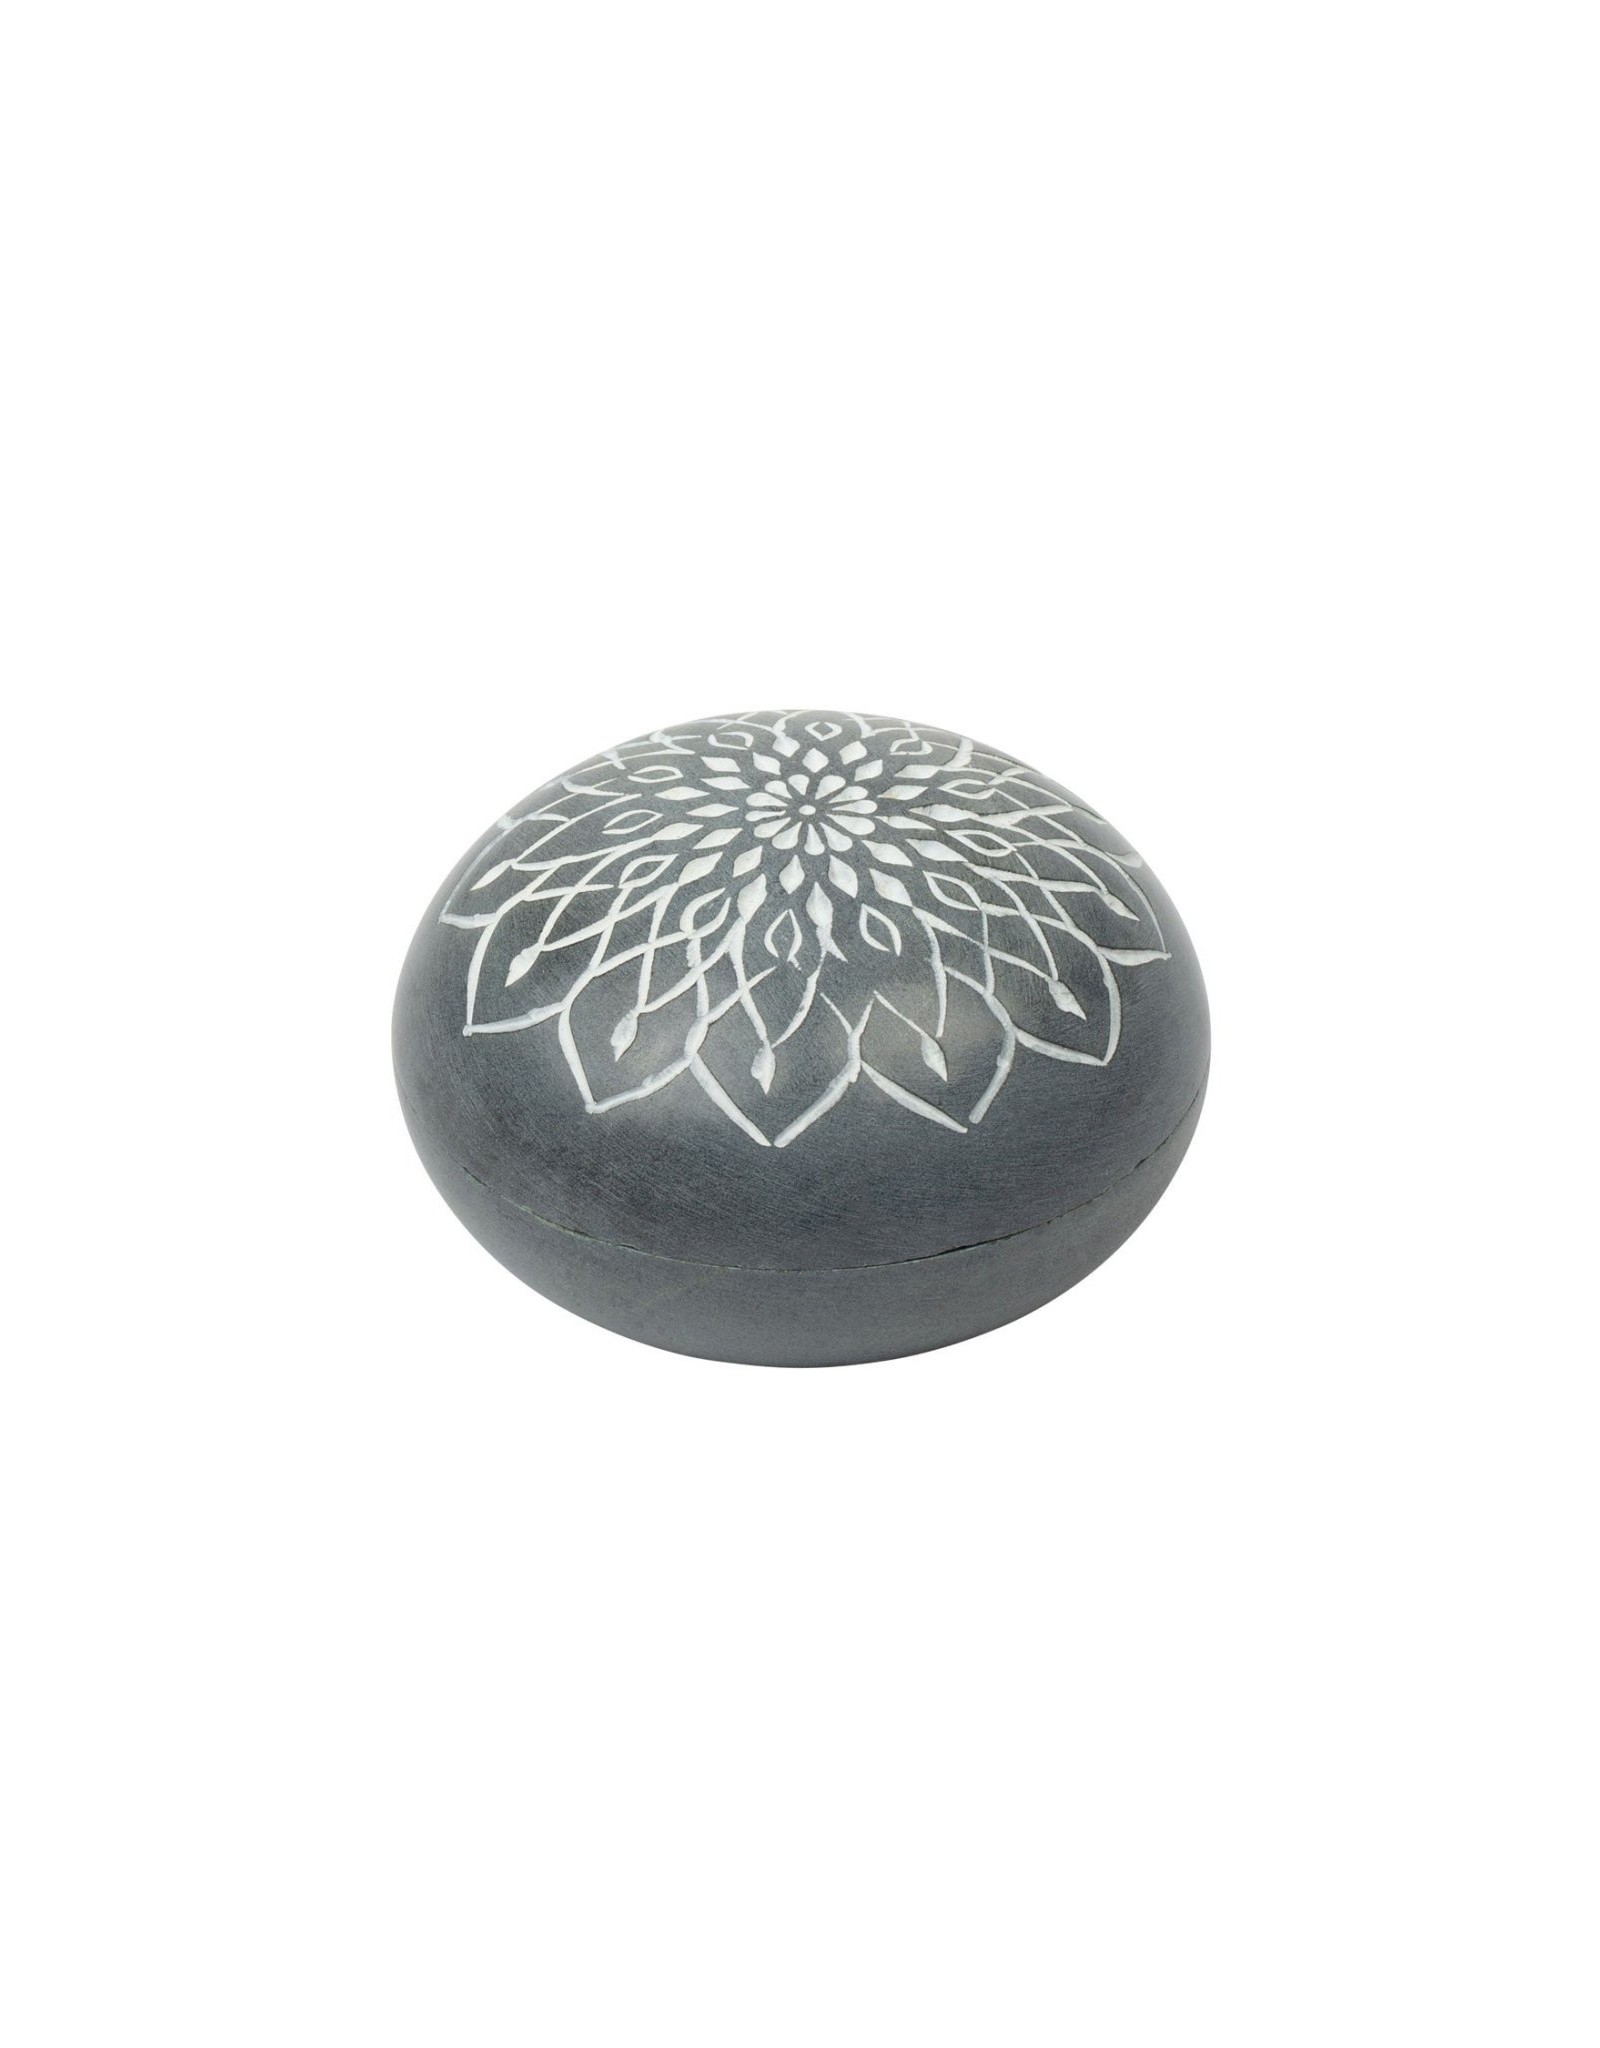 Trade roots Stone Incense & Candle Holder, India